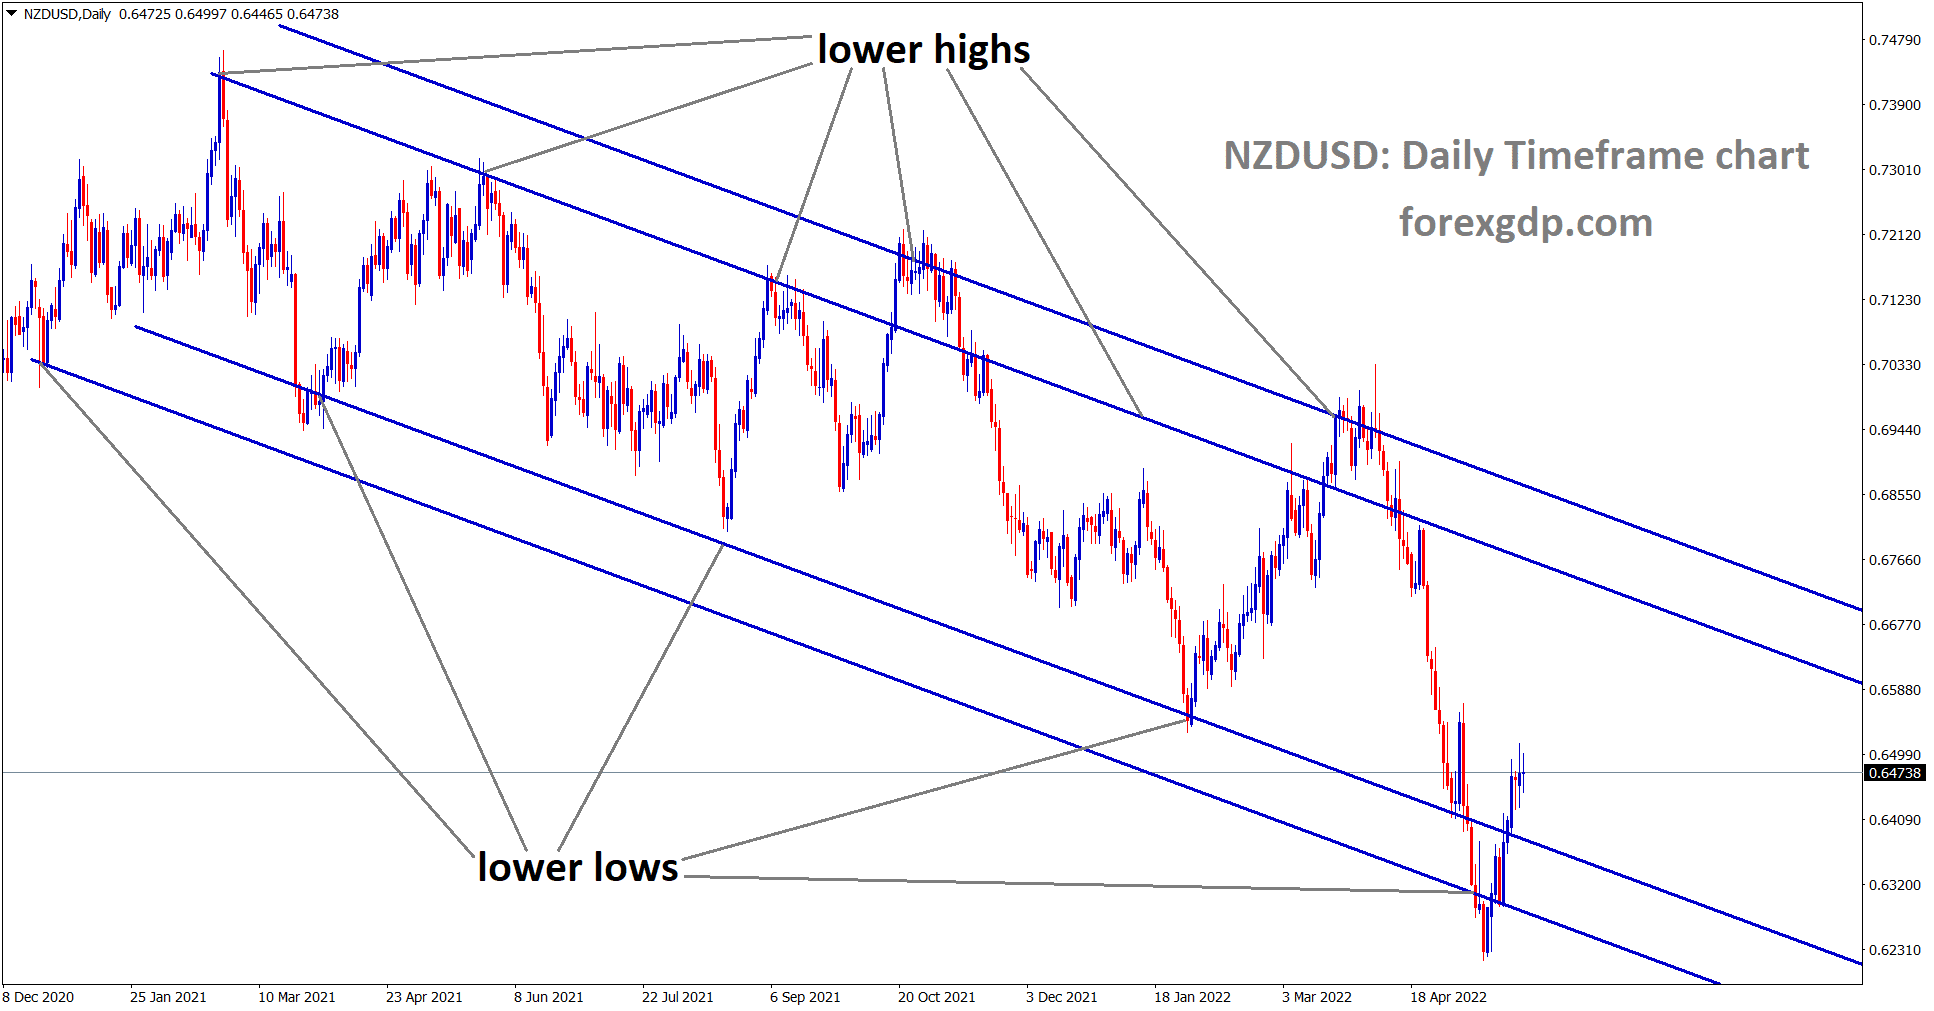 NZDUSD is moving in the Descending channel and the Market has rebounded from the Lower low area of the channel.